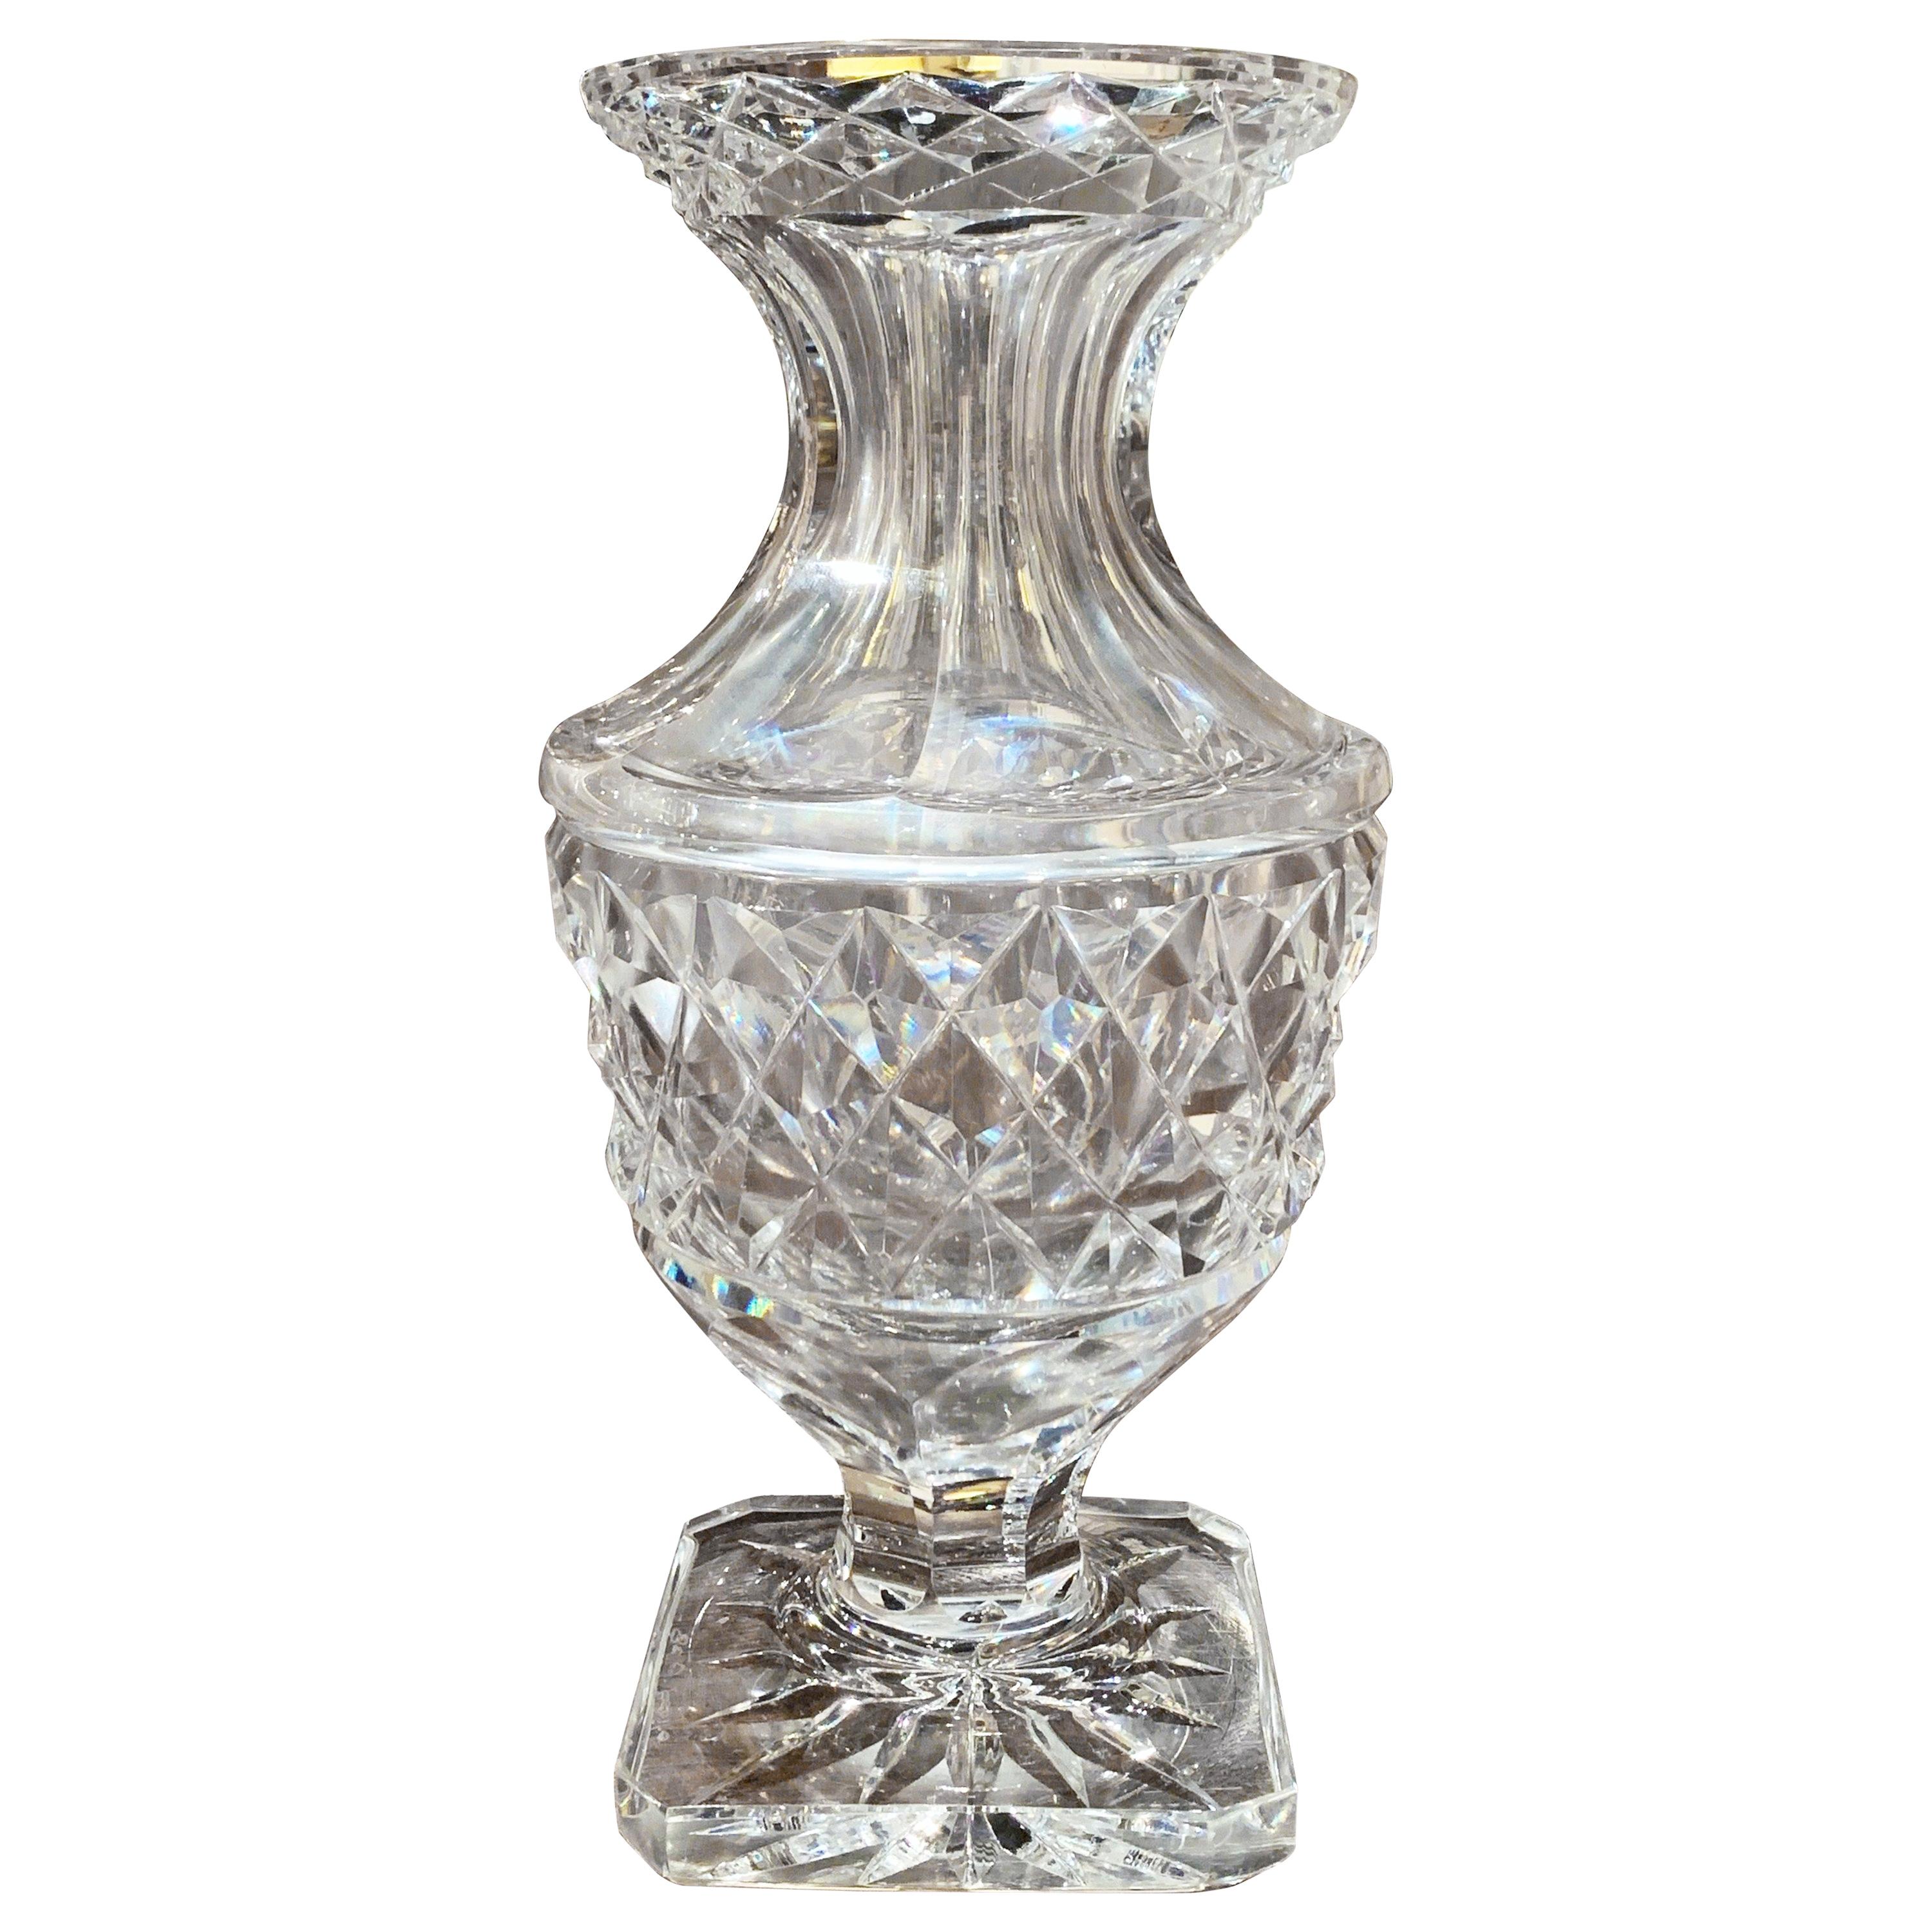 Midcentury Clear Cut-Glass Vase with Geometric Pattern